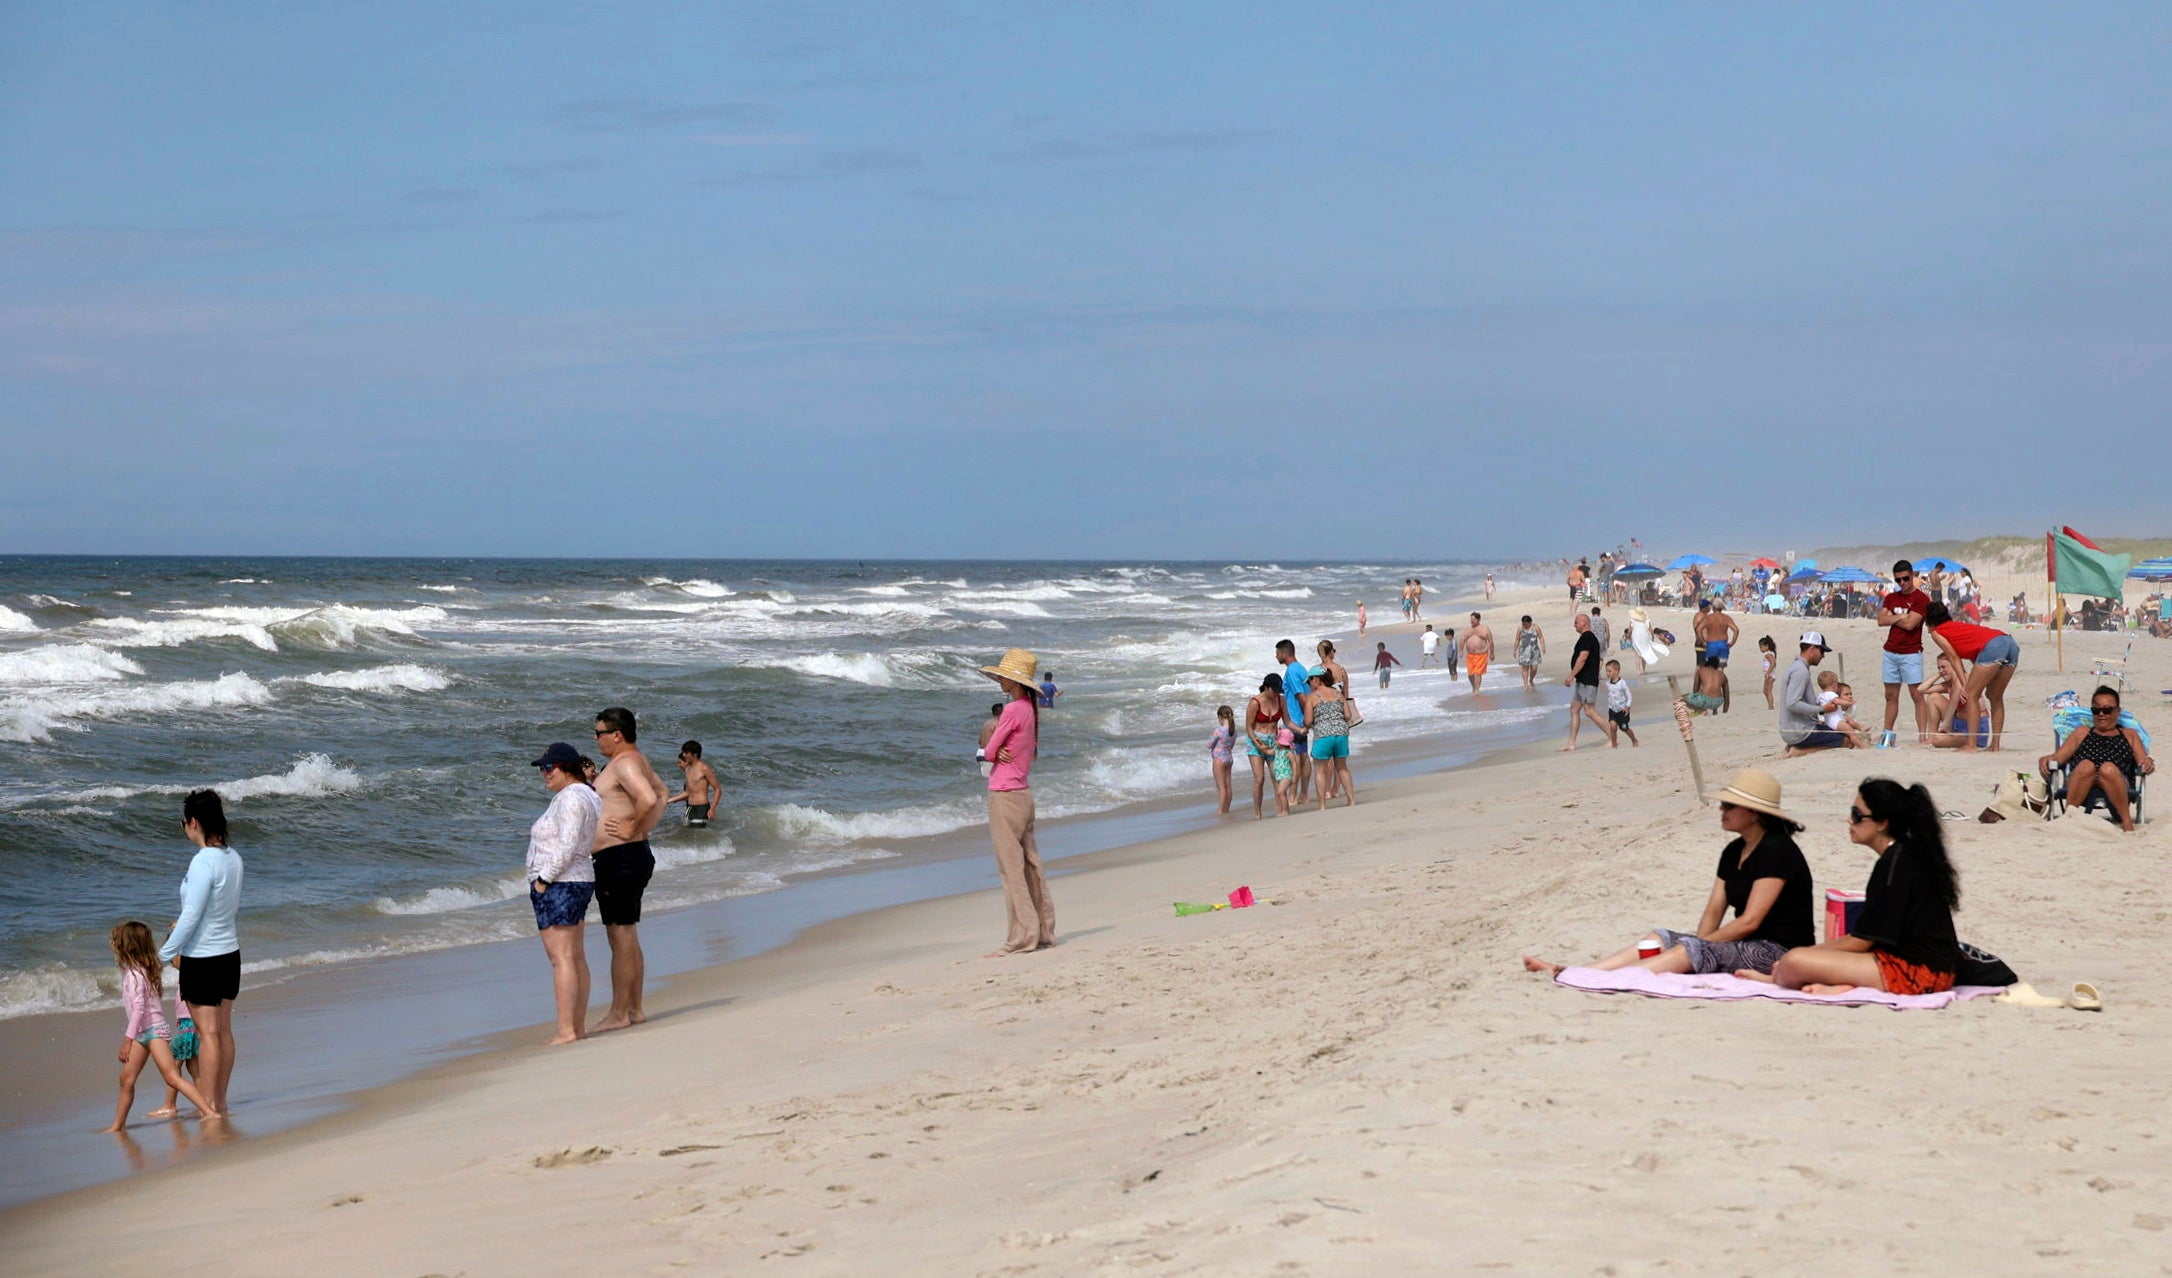 People are seen at Field 3 at Robert Moses State Park in West Islip, N.Y